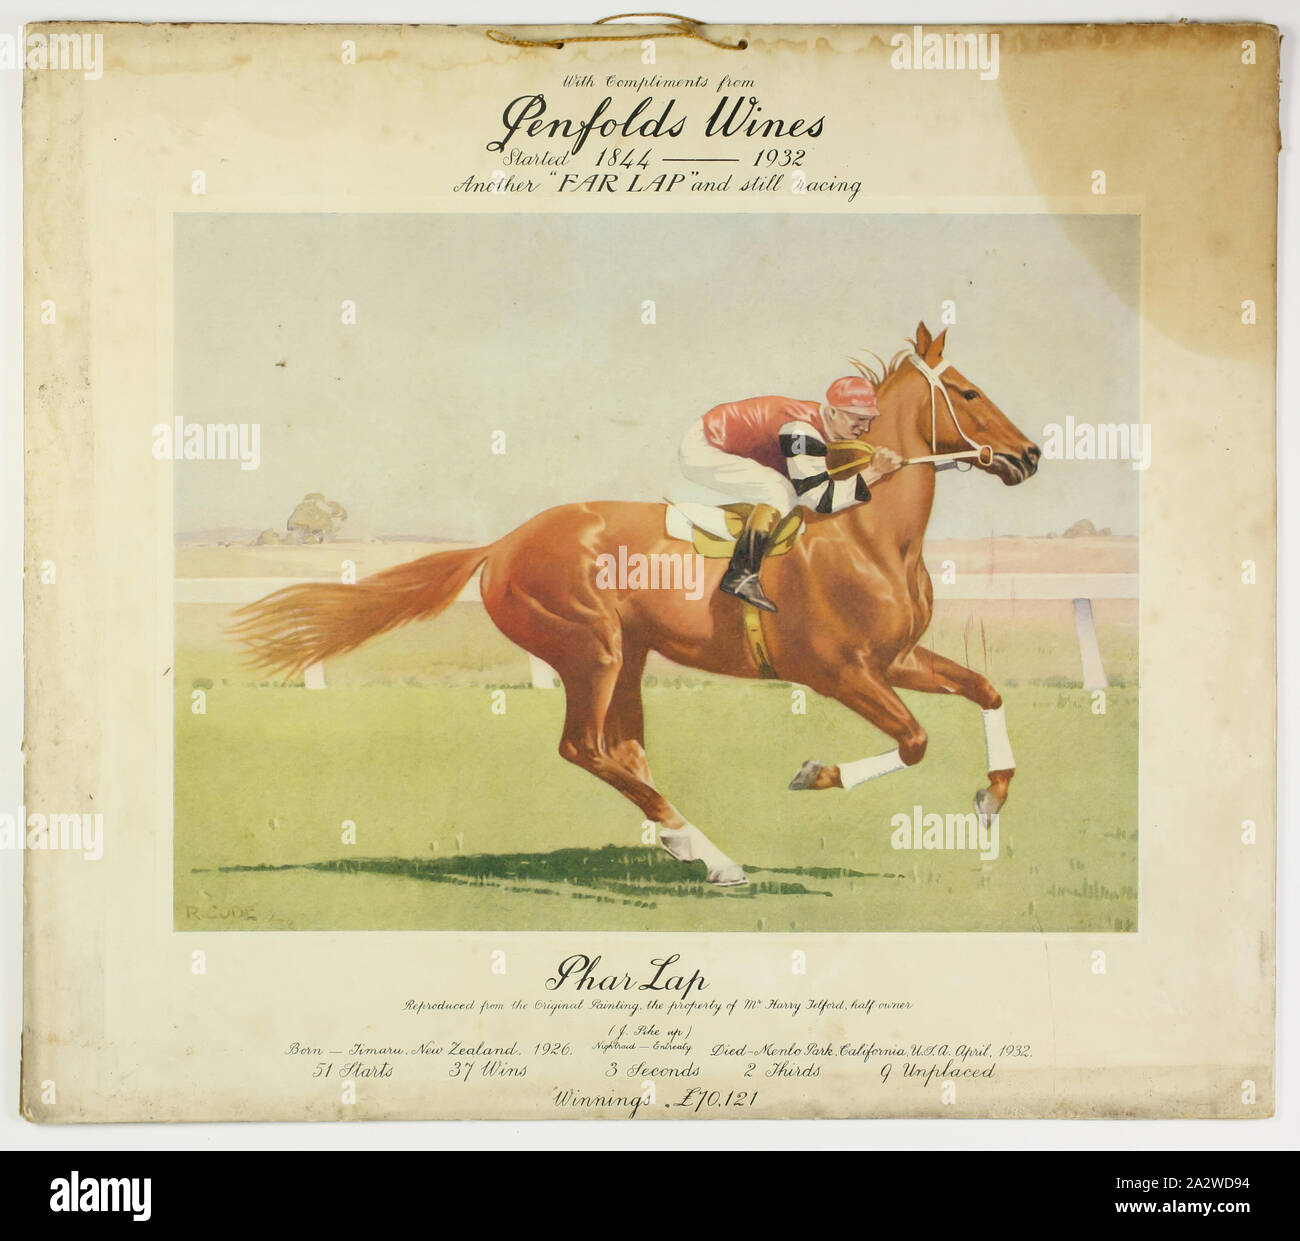 Advertising Print - Penfolds Wines, Phar Lap, 1932, Card advertising poster produced by Penfolds Wines, dated 1932. It features a coloured painting of Phar Lap, reproduced from the original painted by R. Code and owned by Harry Telford, trainer of Phar Lap. The poster also features a brief summary of the horse's racing career Stock Photo